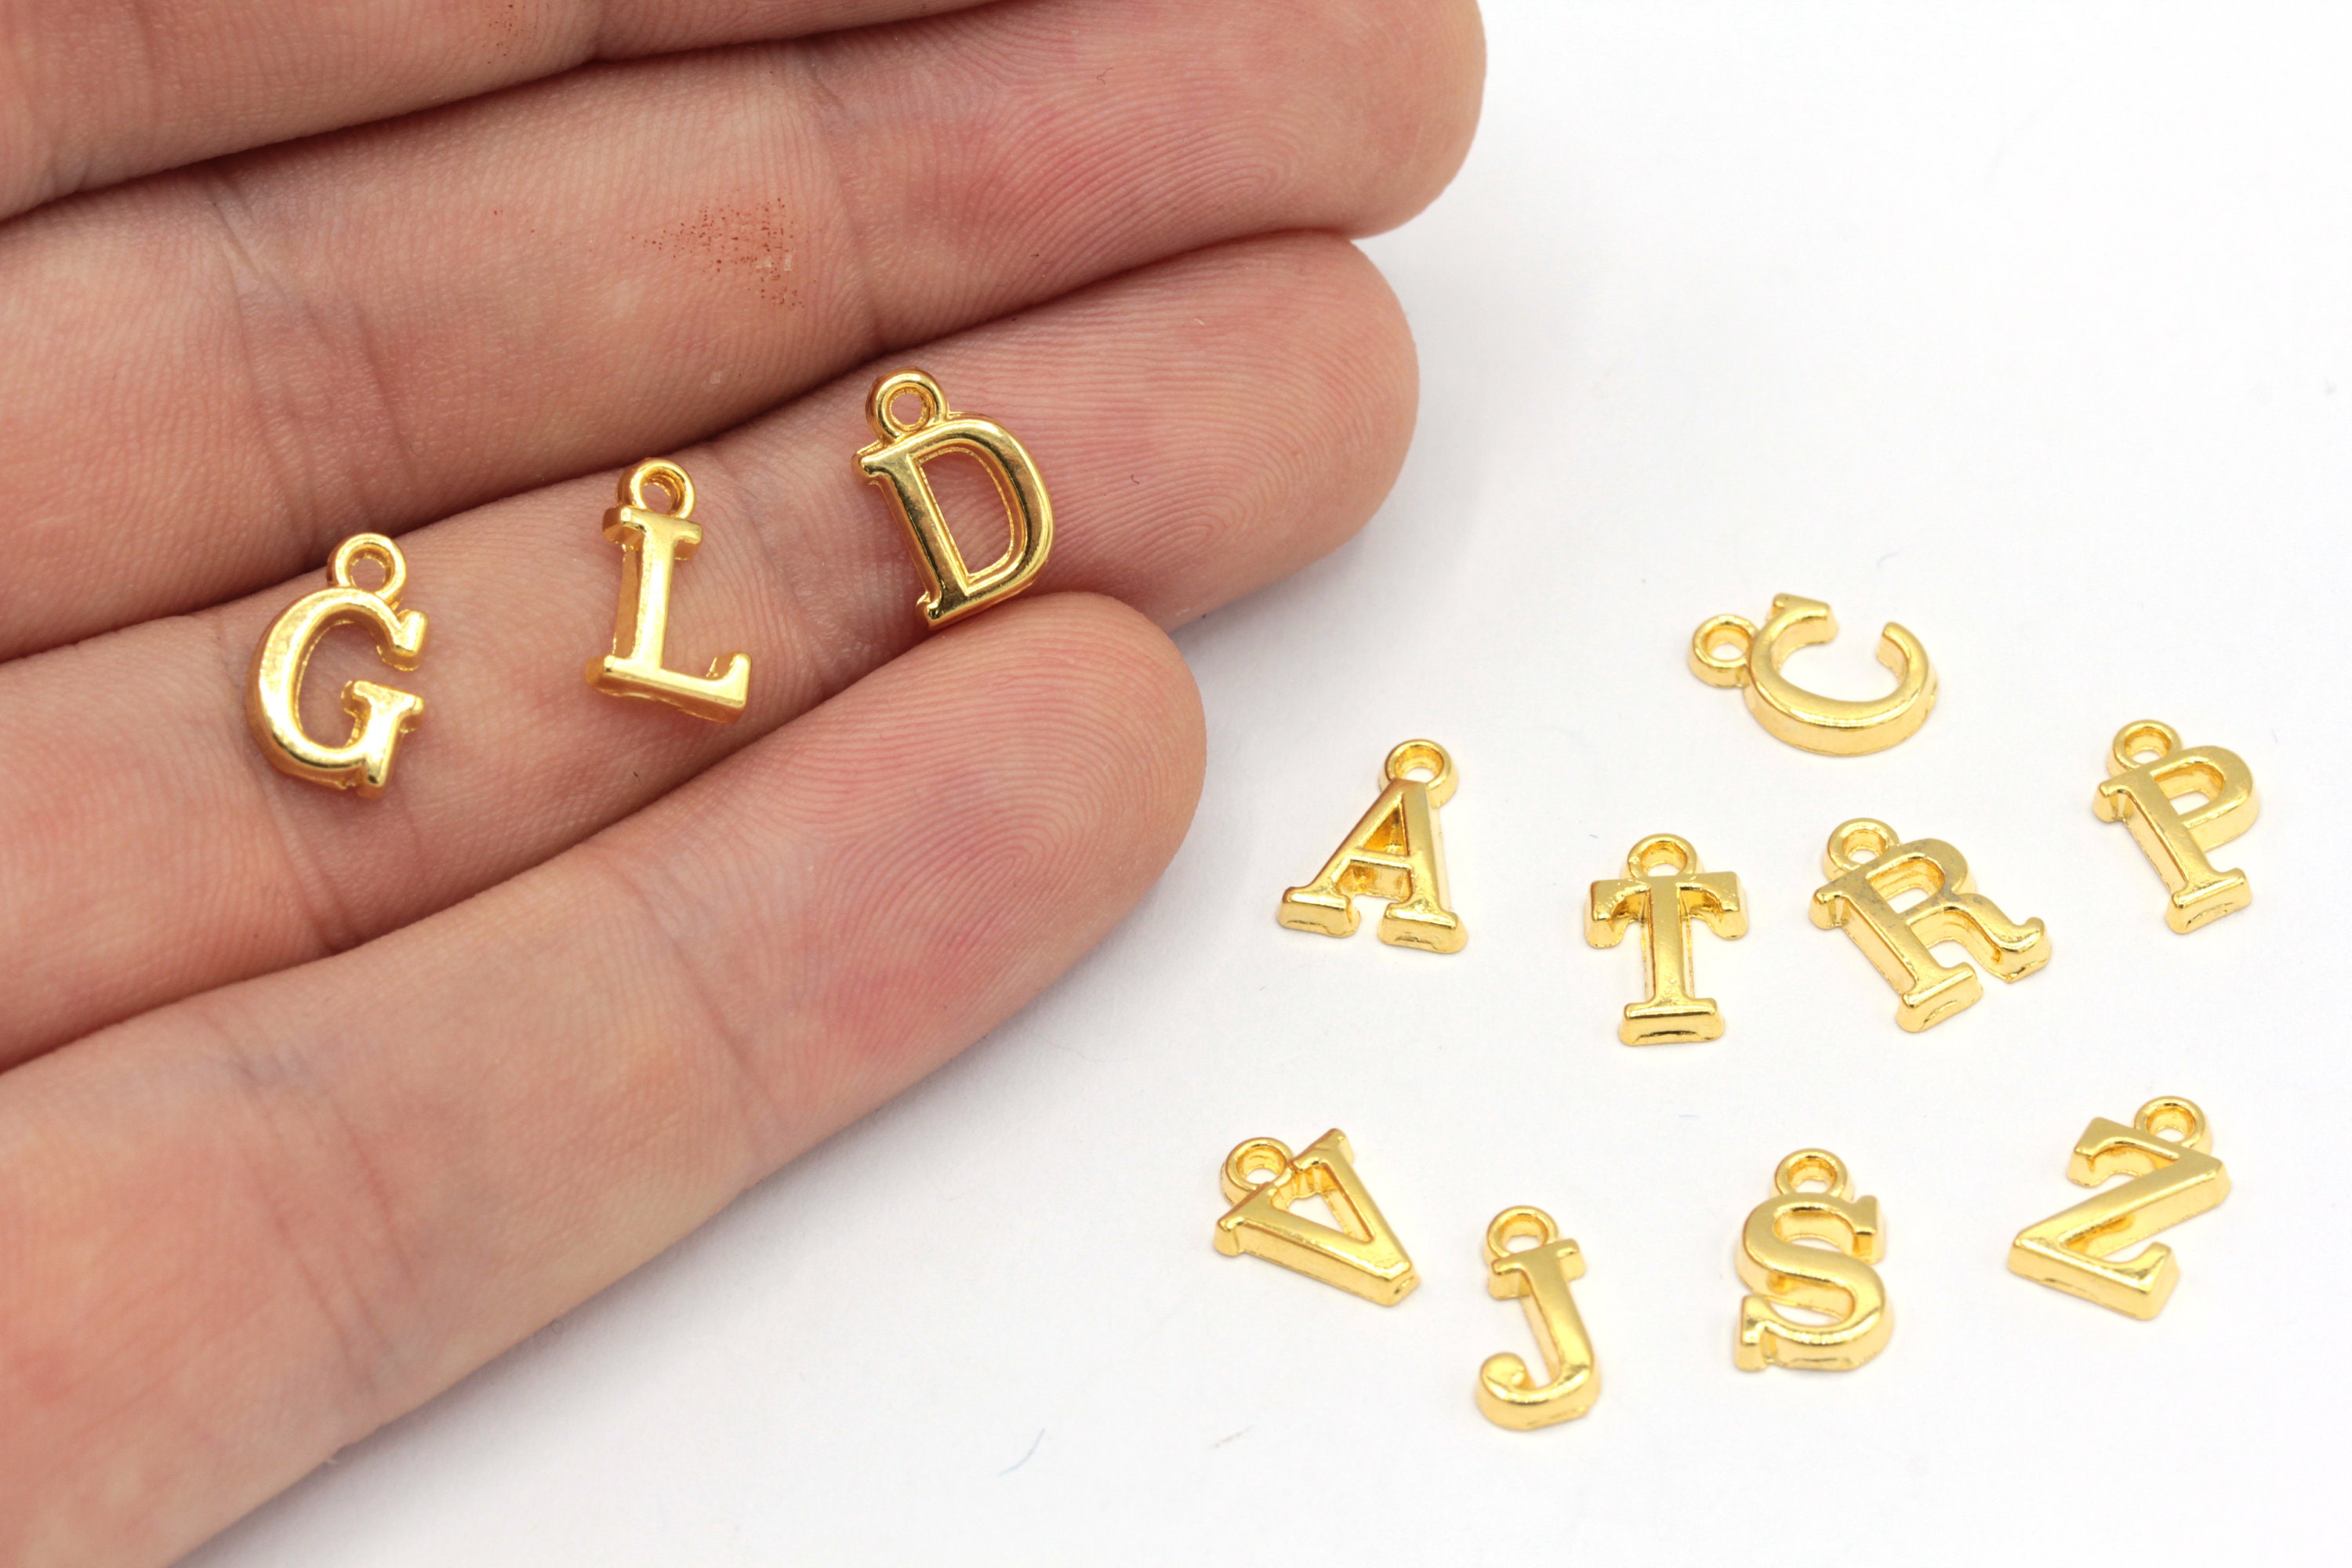 ANCADN 1000pcs Letter Beads Color Gold Round Letter Beads Alphabet AZ Round  Beads for DIY Jewelry Making (Color/Gold)